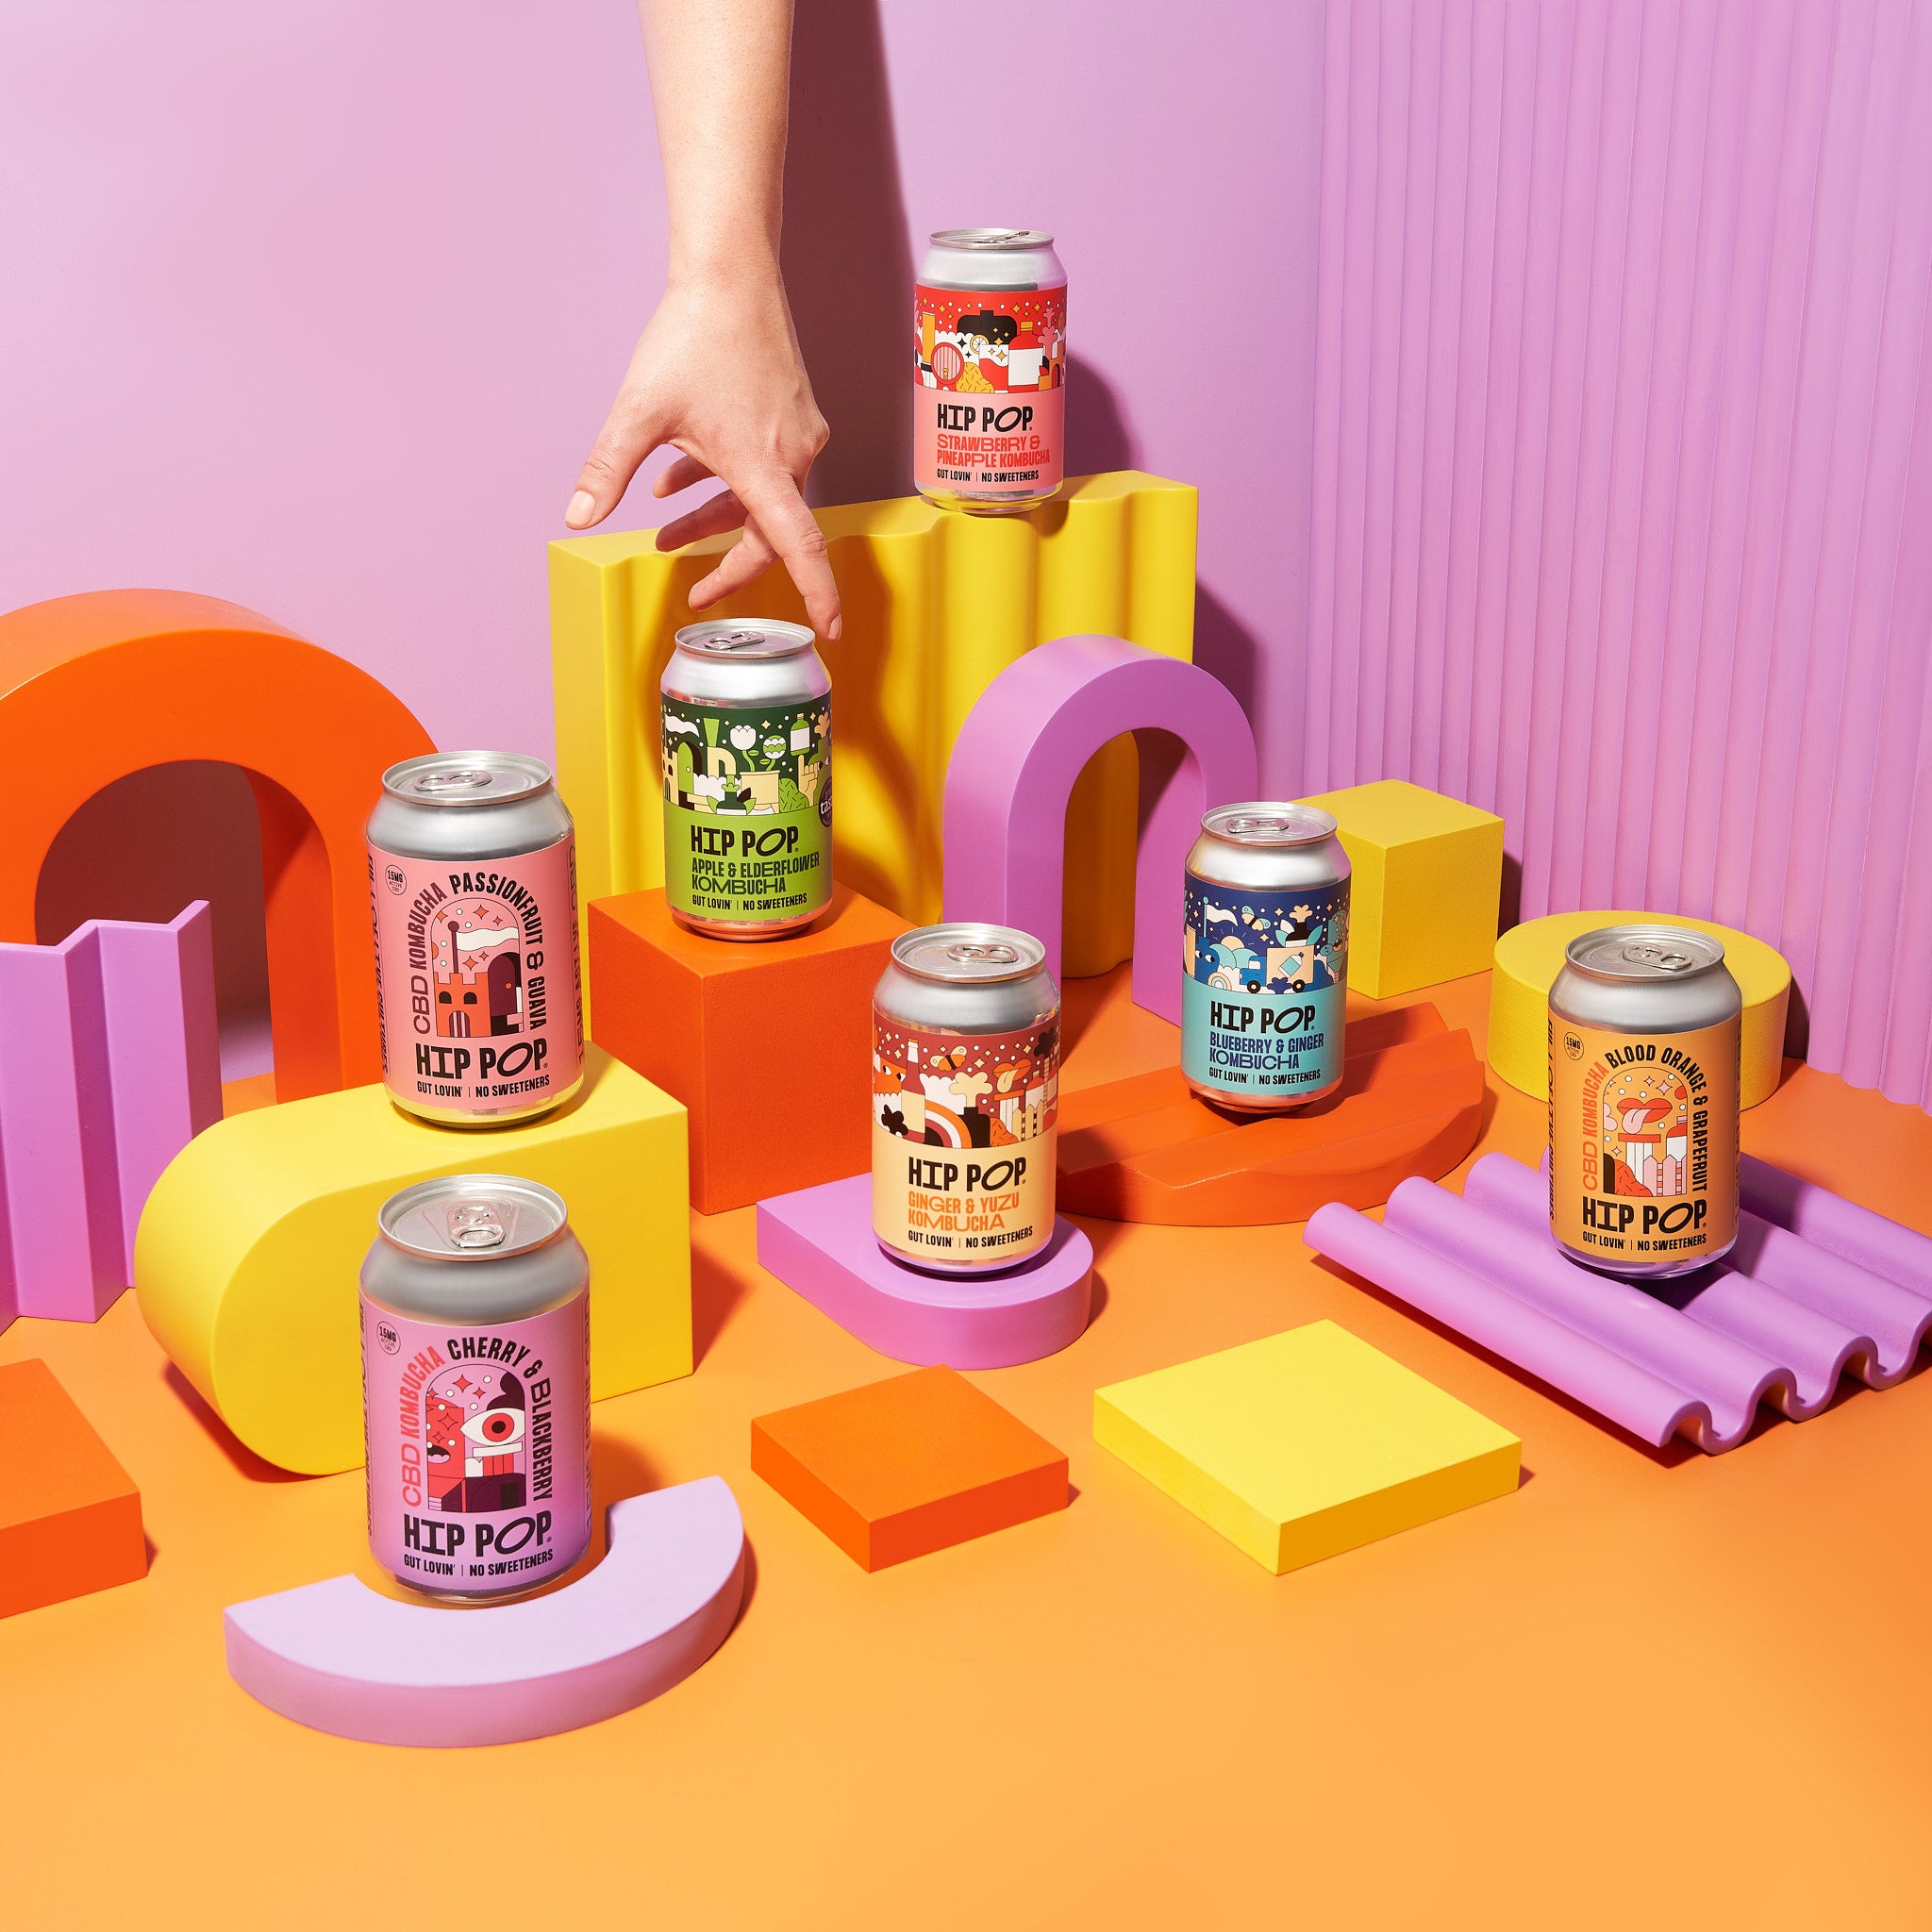 Hip Pop - All Kombucha Ranges On Table with Props